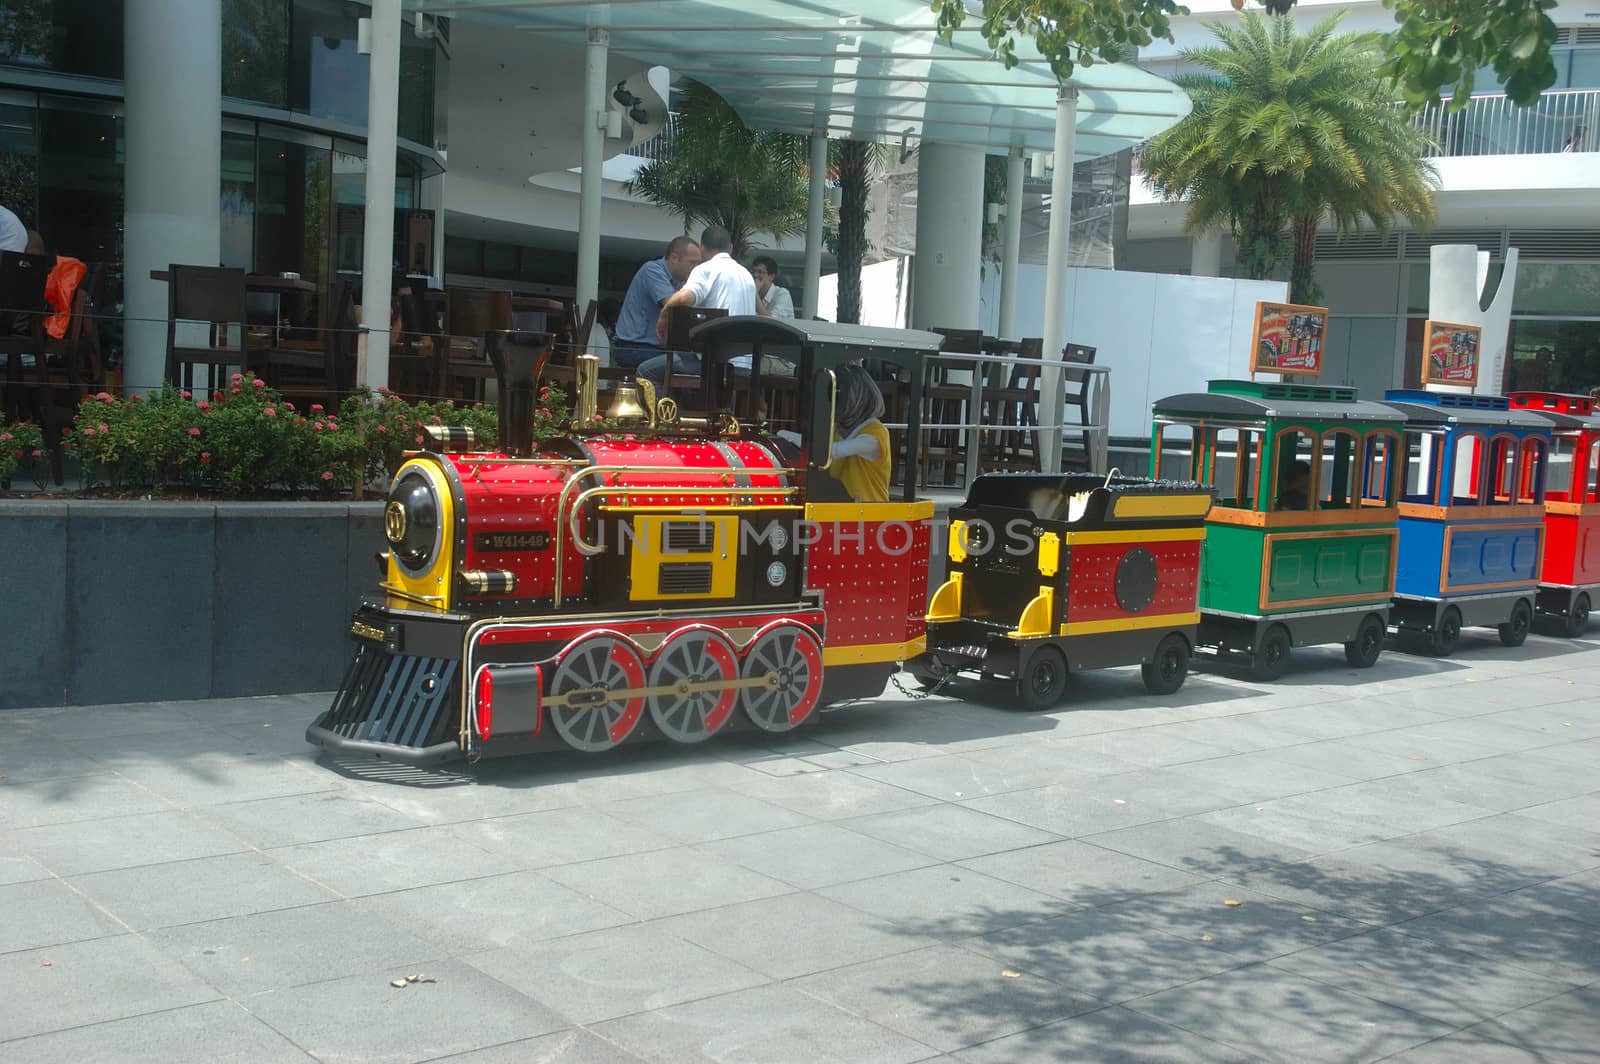 Harbour Front, Singapore - April 13, 2013: Toy train that become one of tourist attraction at Harbour Front, Singapore.